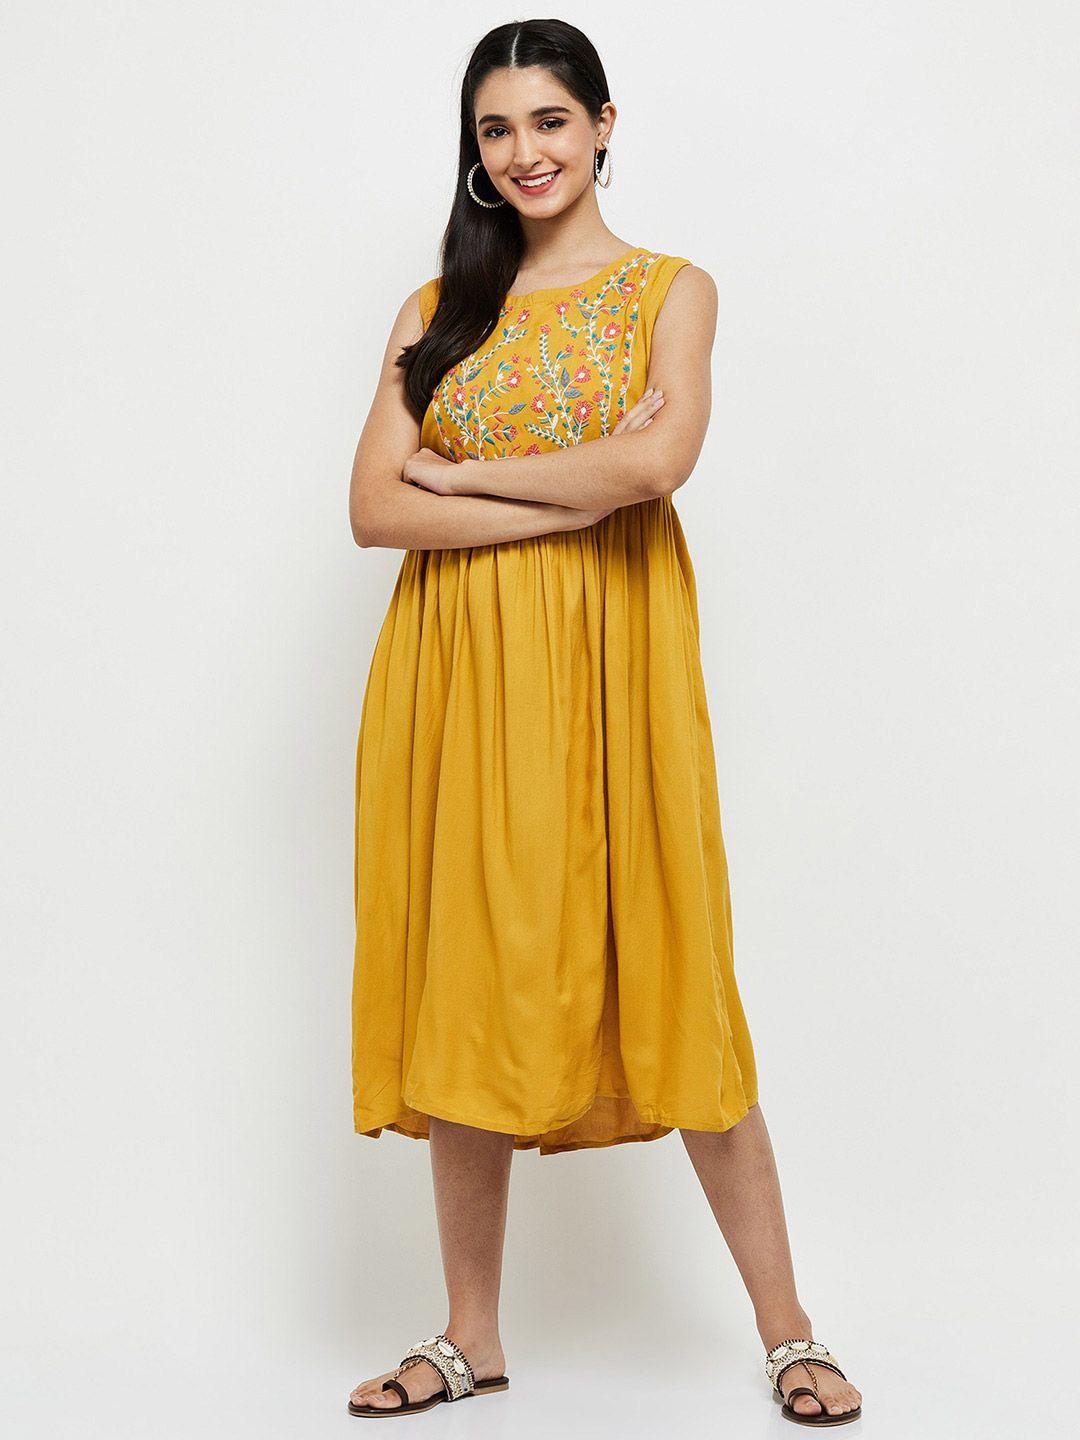 max-mustard-yellow-&-blue-floral-floral-embroidered-midi-dress